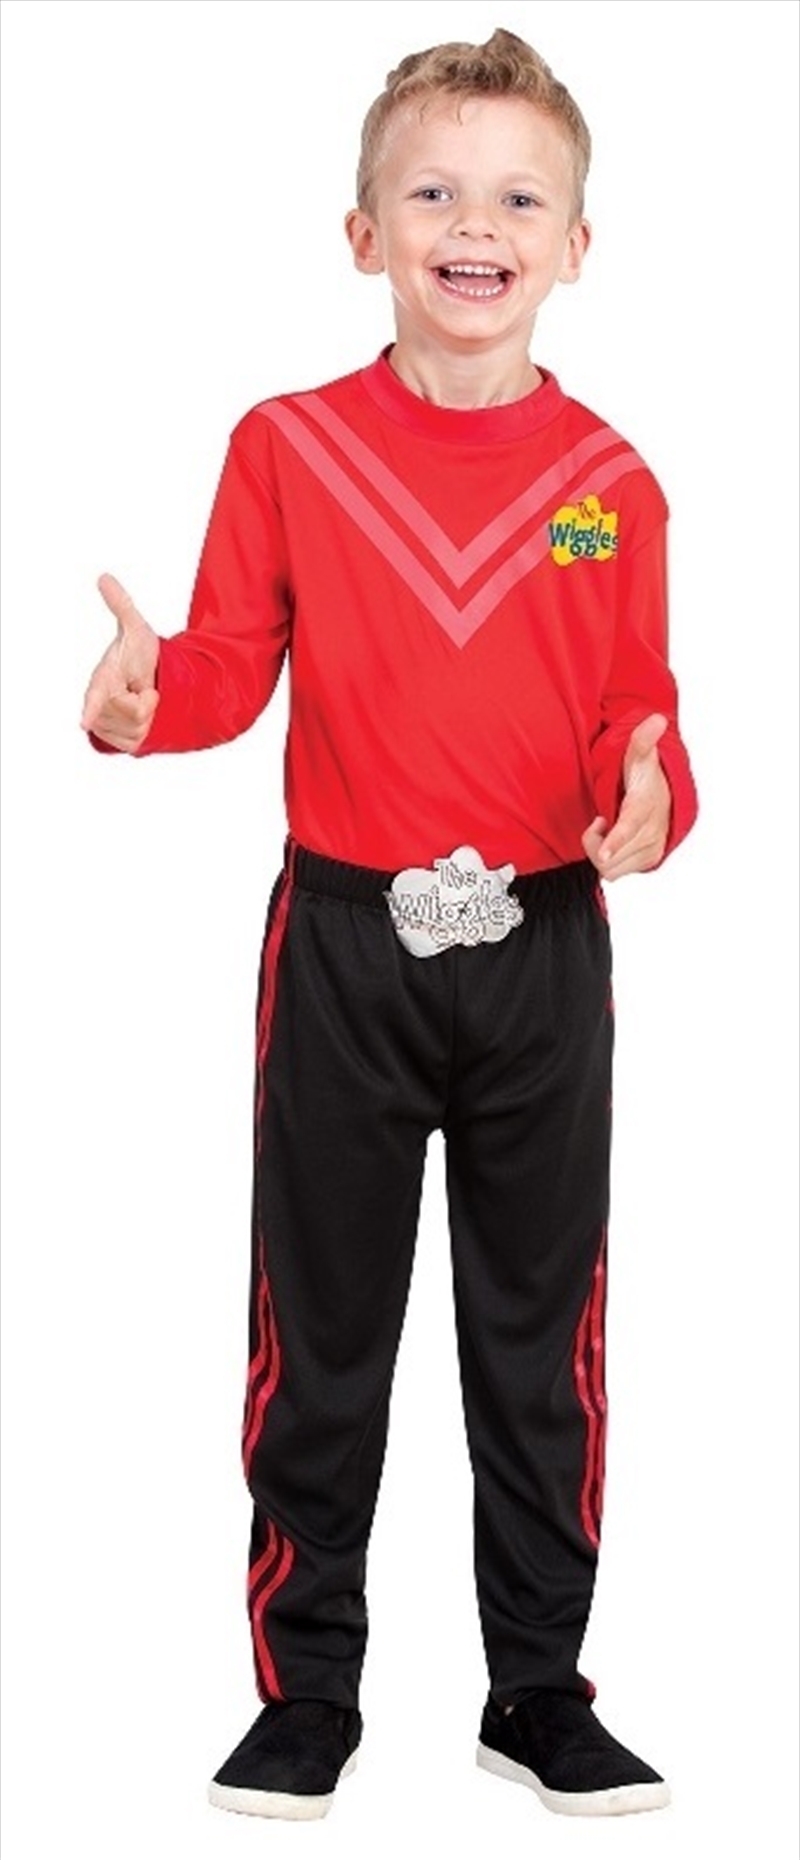 Simon Wiggle Deluxe Costume: 3-5/Product Detail/Costumes